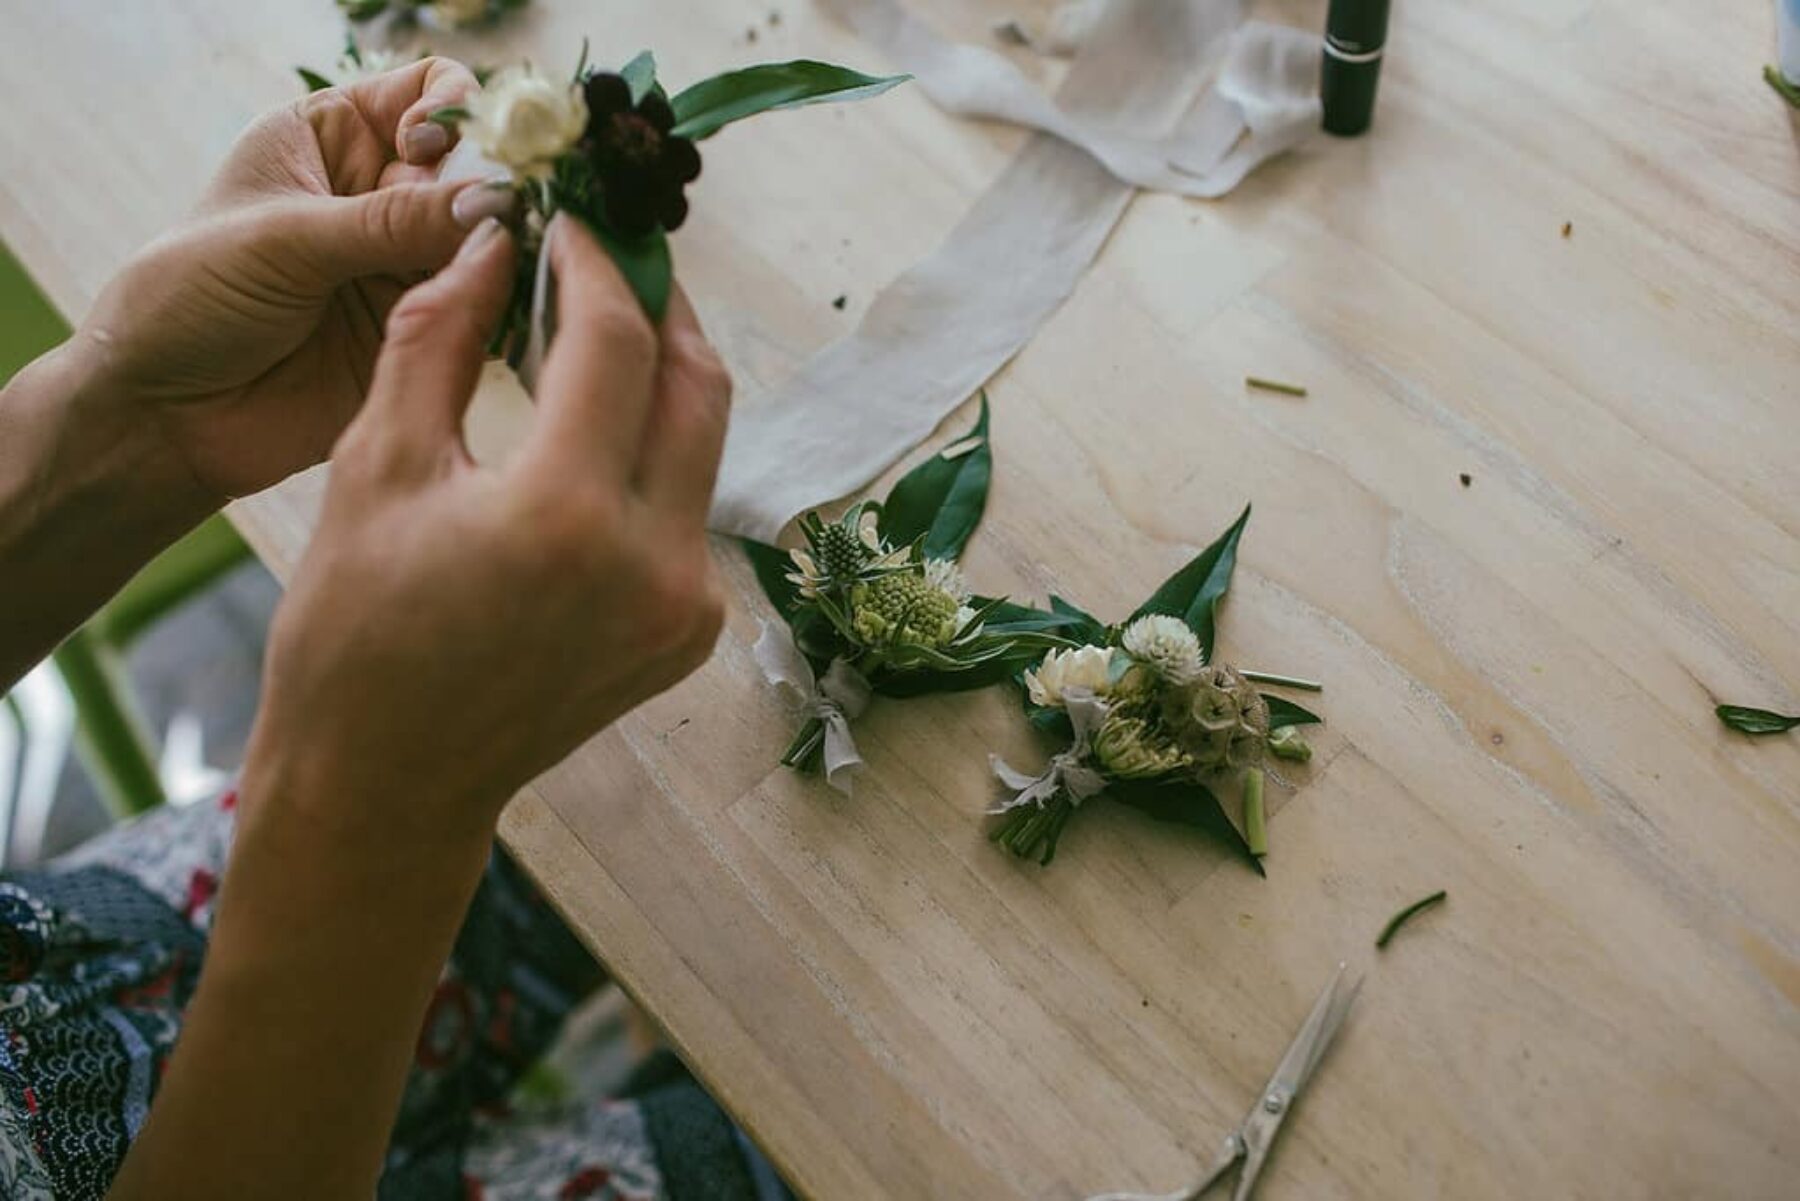 green and white boutonniere